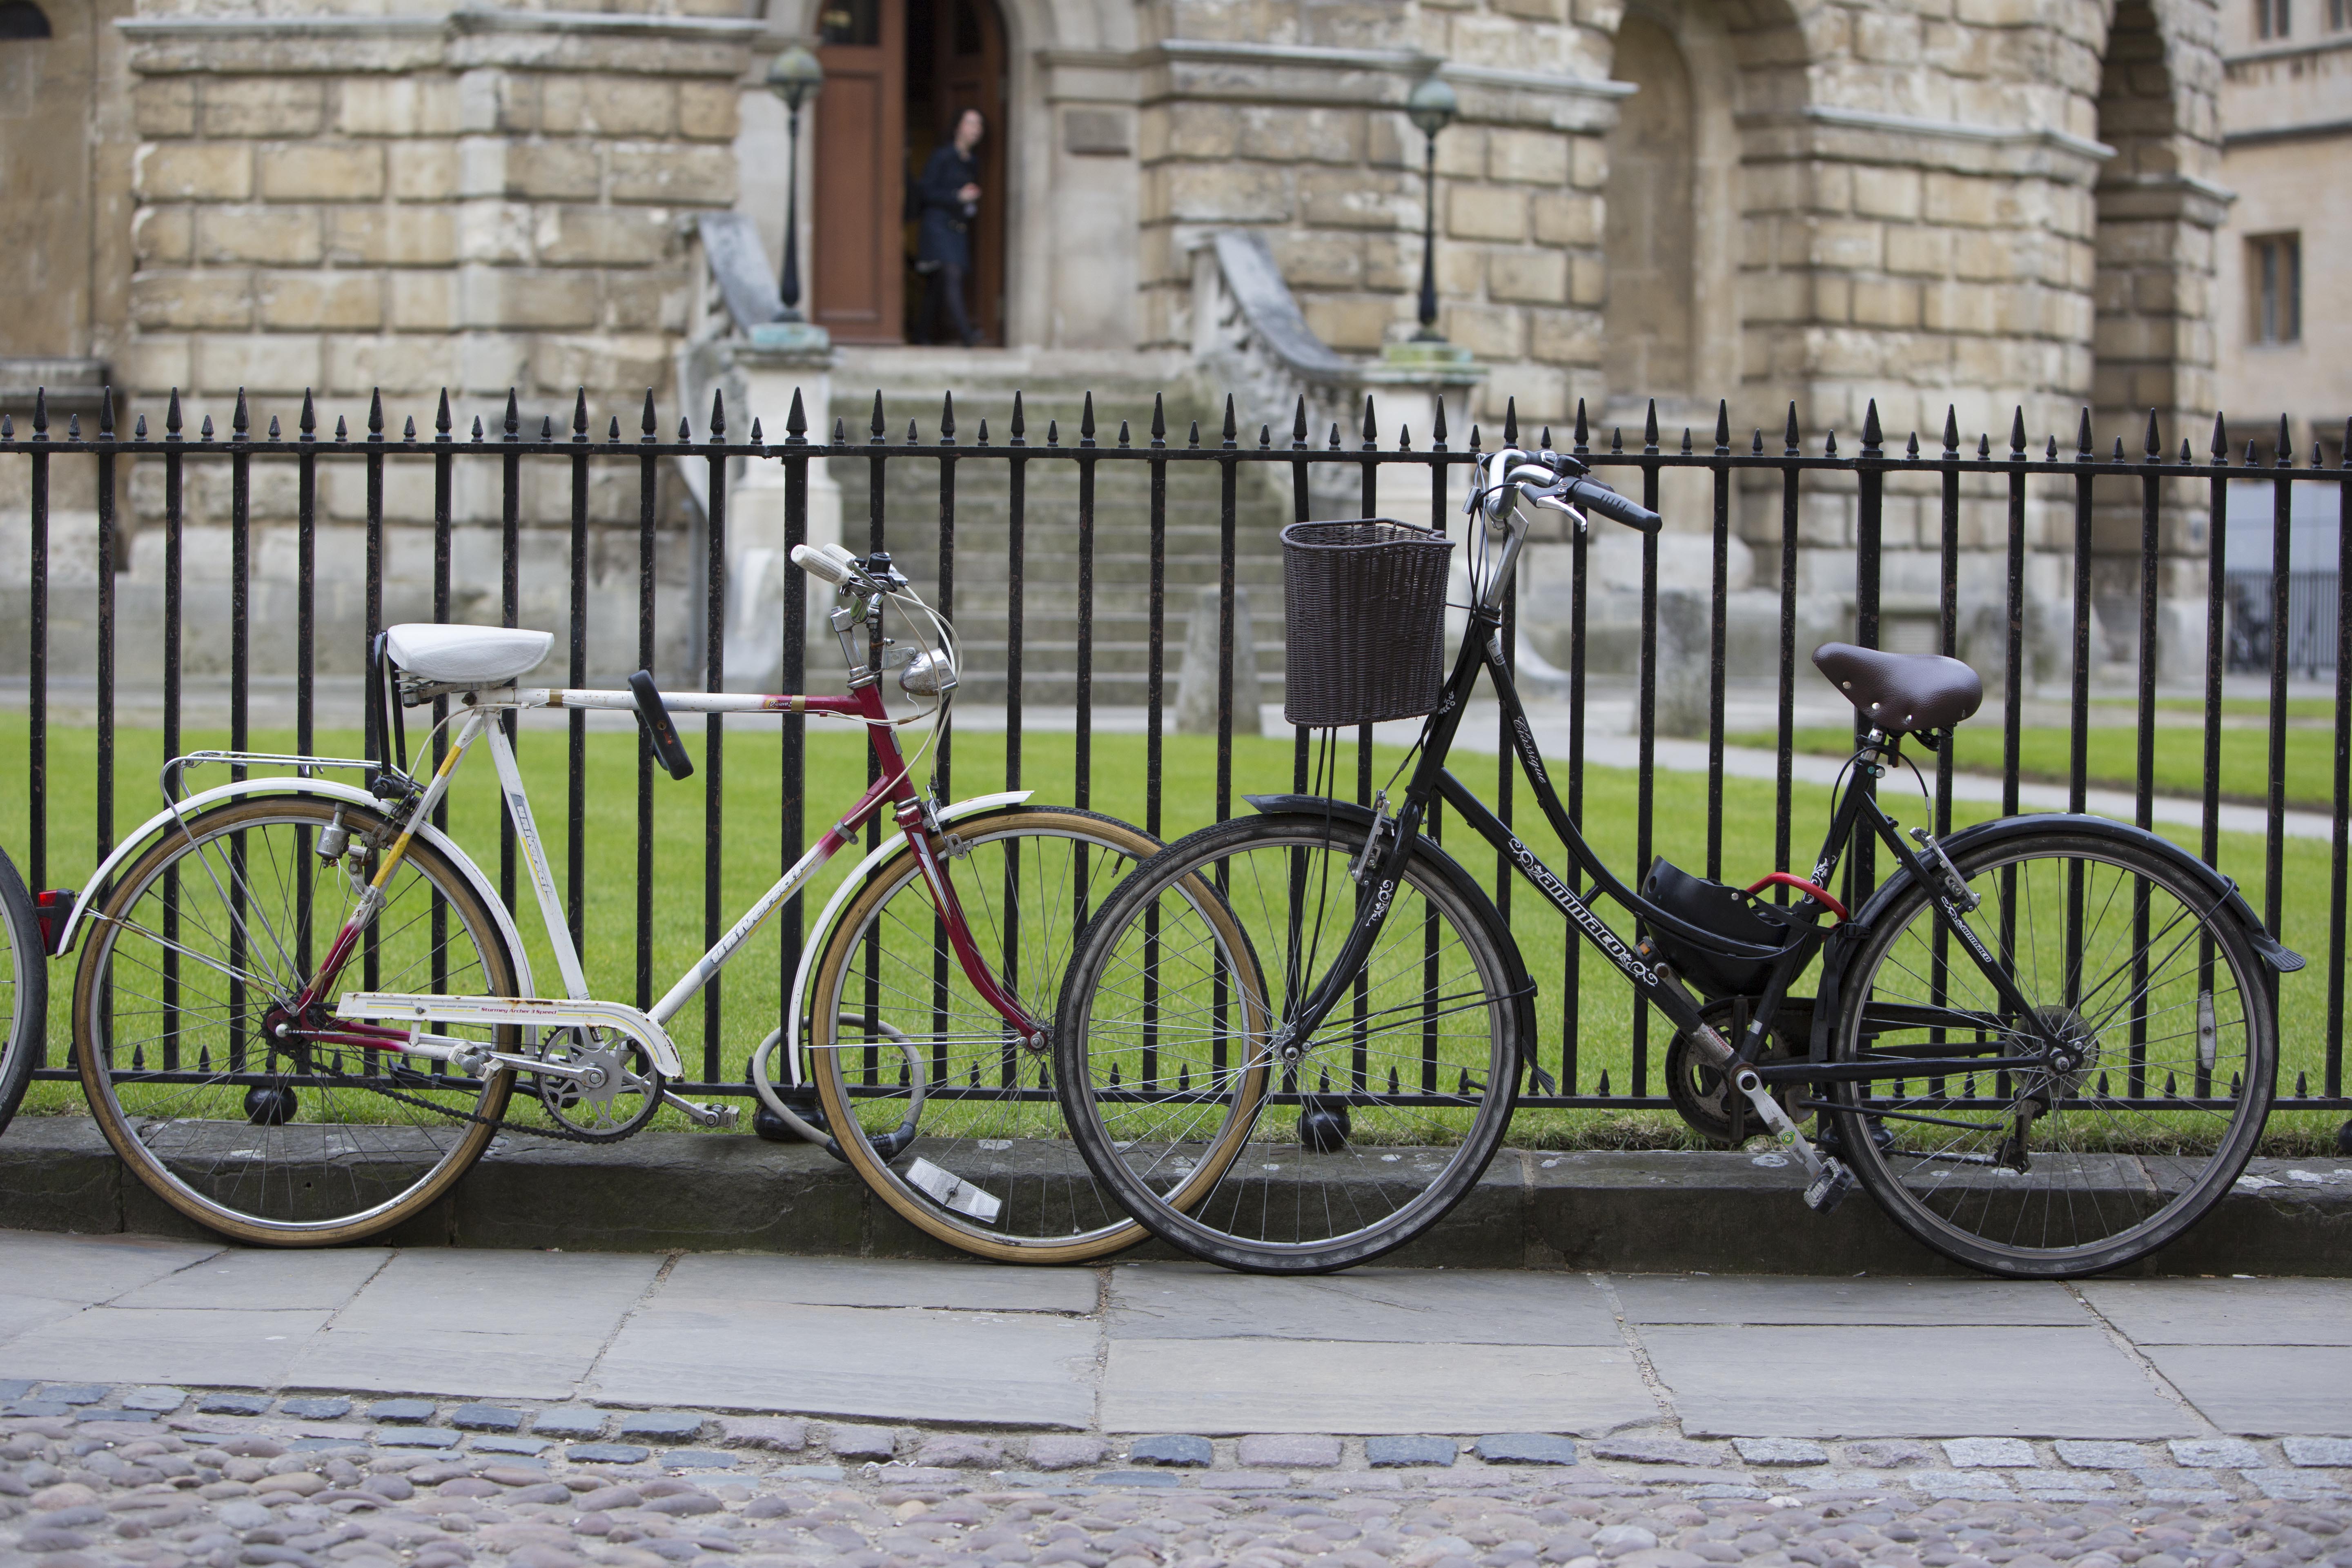 Bikes against railings at the Radcliffe Camera, Oxford